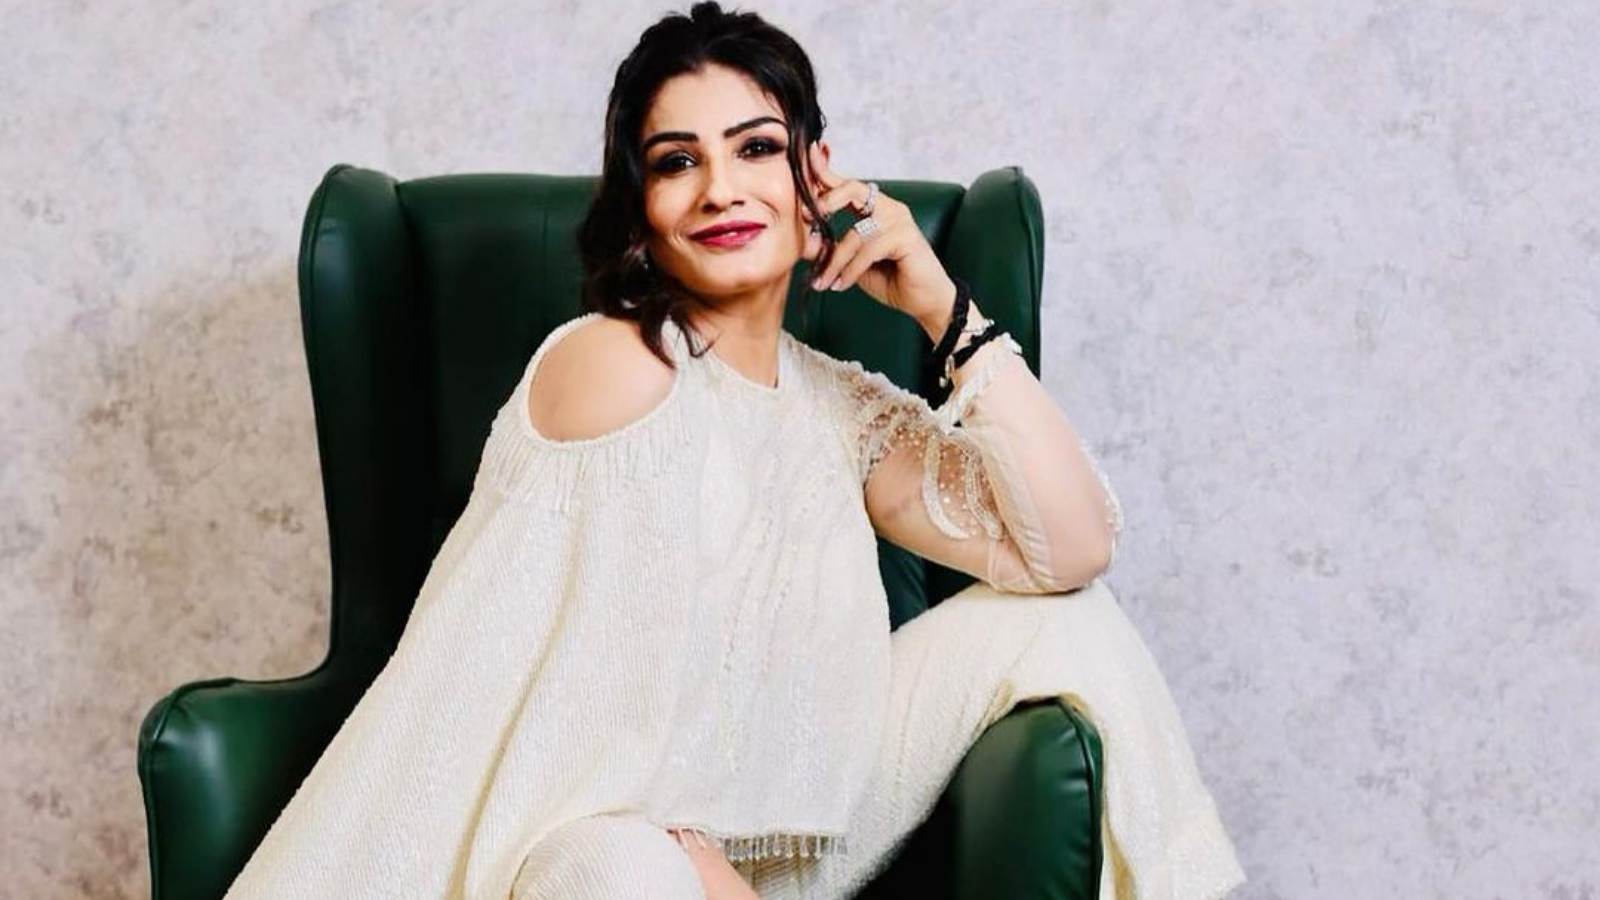 Raveena Tandon Xnx Video - Raveena Tandon says South film industry doesn't make 'elitist' films while  Hindi movies have become 'westernised': 'They have started making DVD  copiesâ€¦' | Bollywood News - The Indian Express